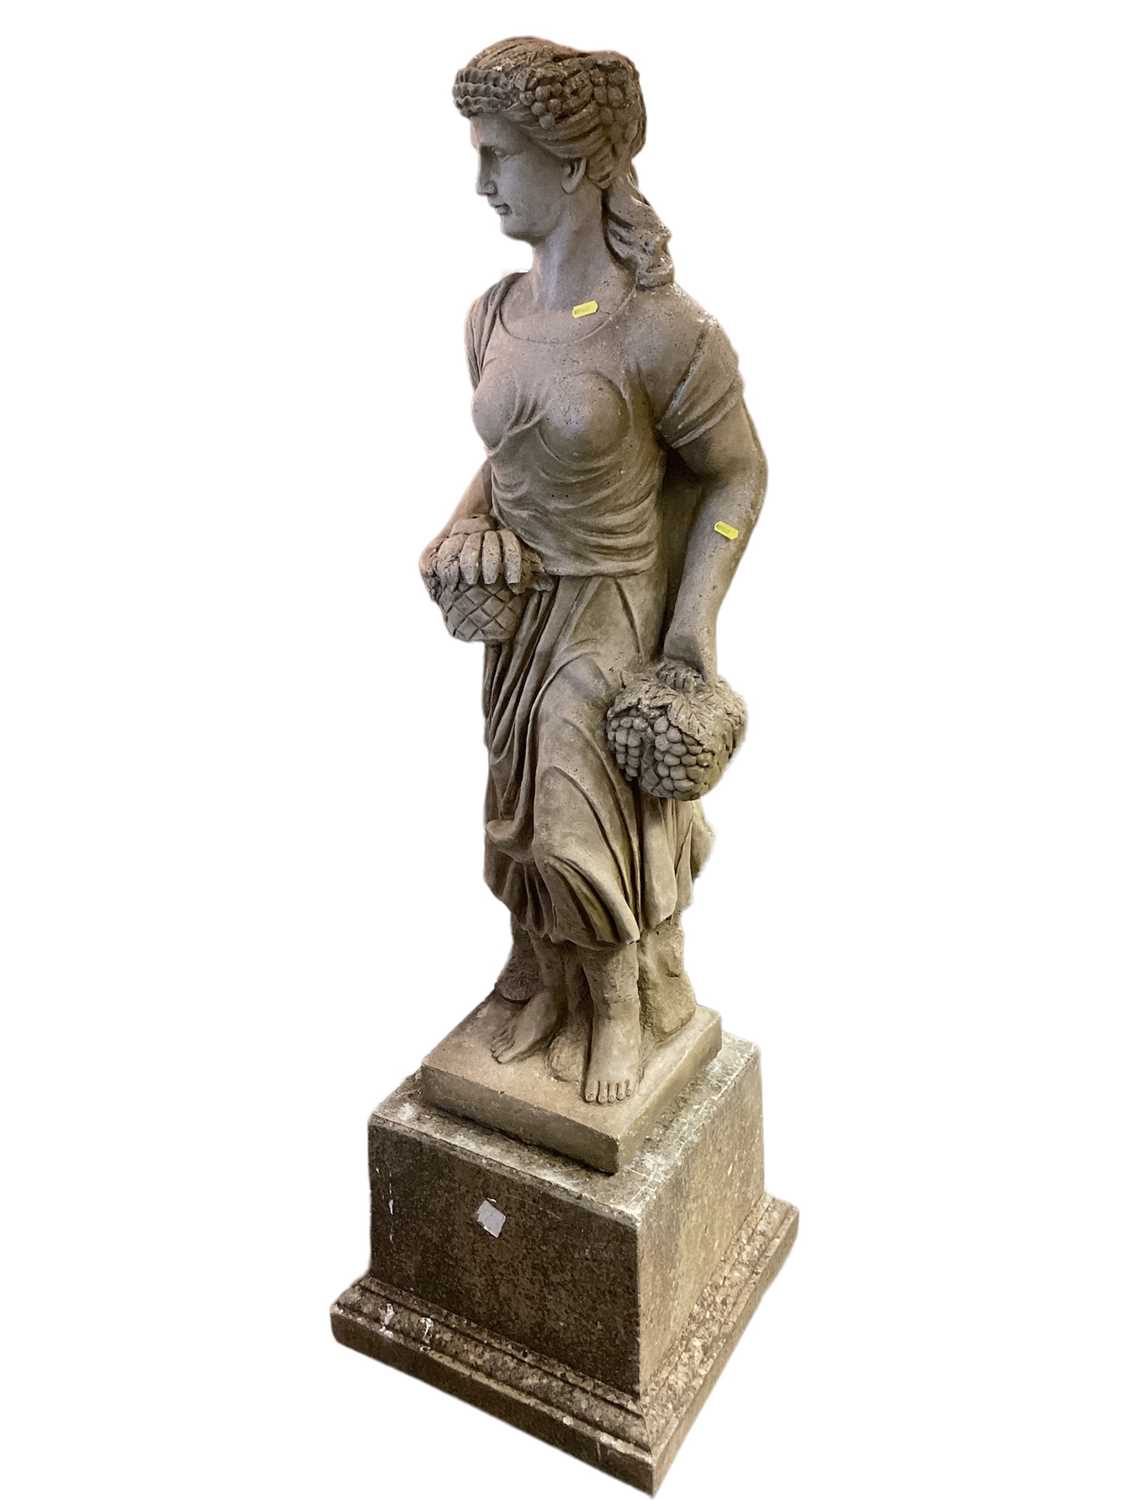 Concrete garden statue of a lady carrying fruit on plinth base, 154cm high